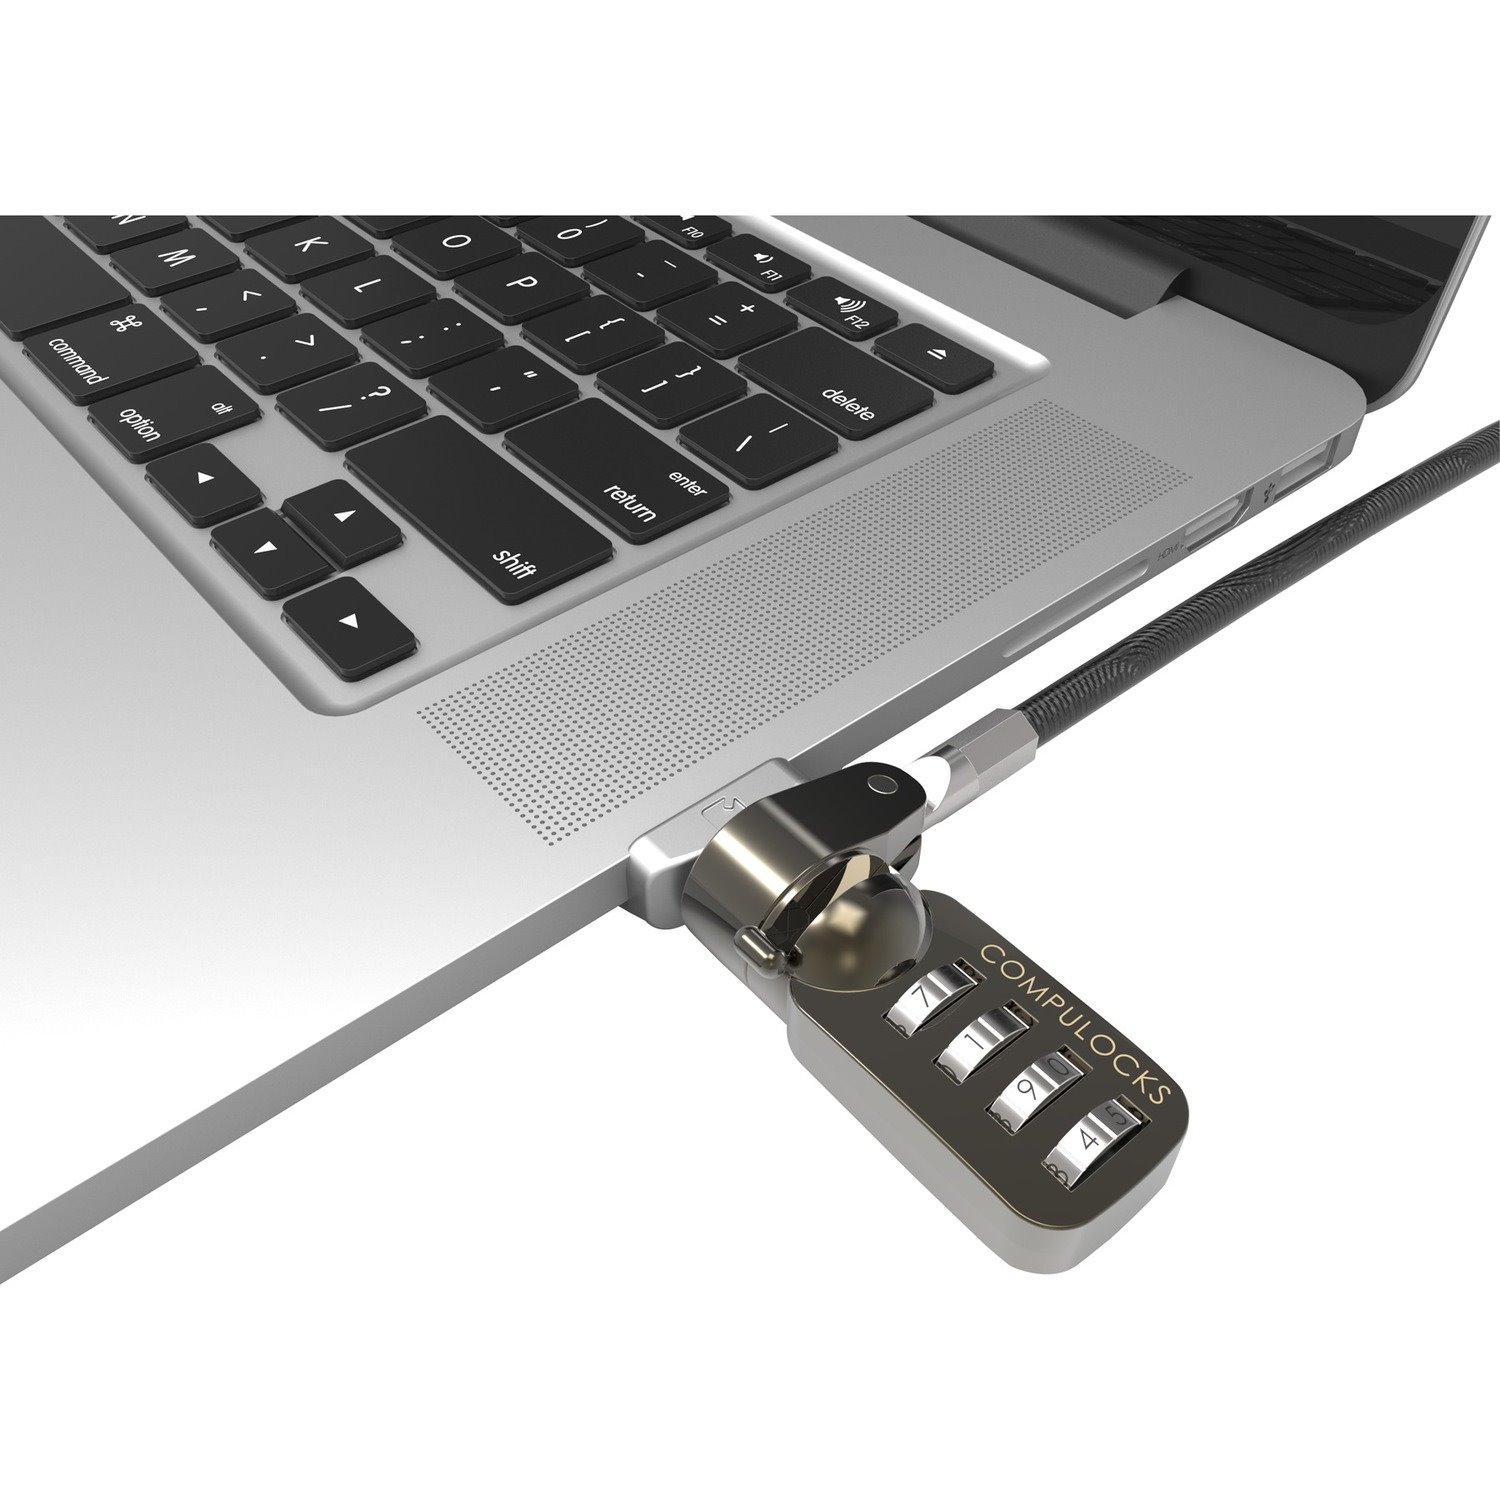 MacBook Air Retina, 13-inch, 2012 - 2015 Cable Lock Adapter With Combination Cable Lock